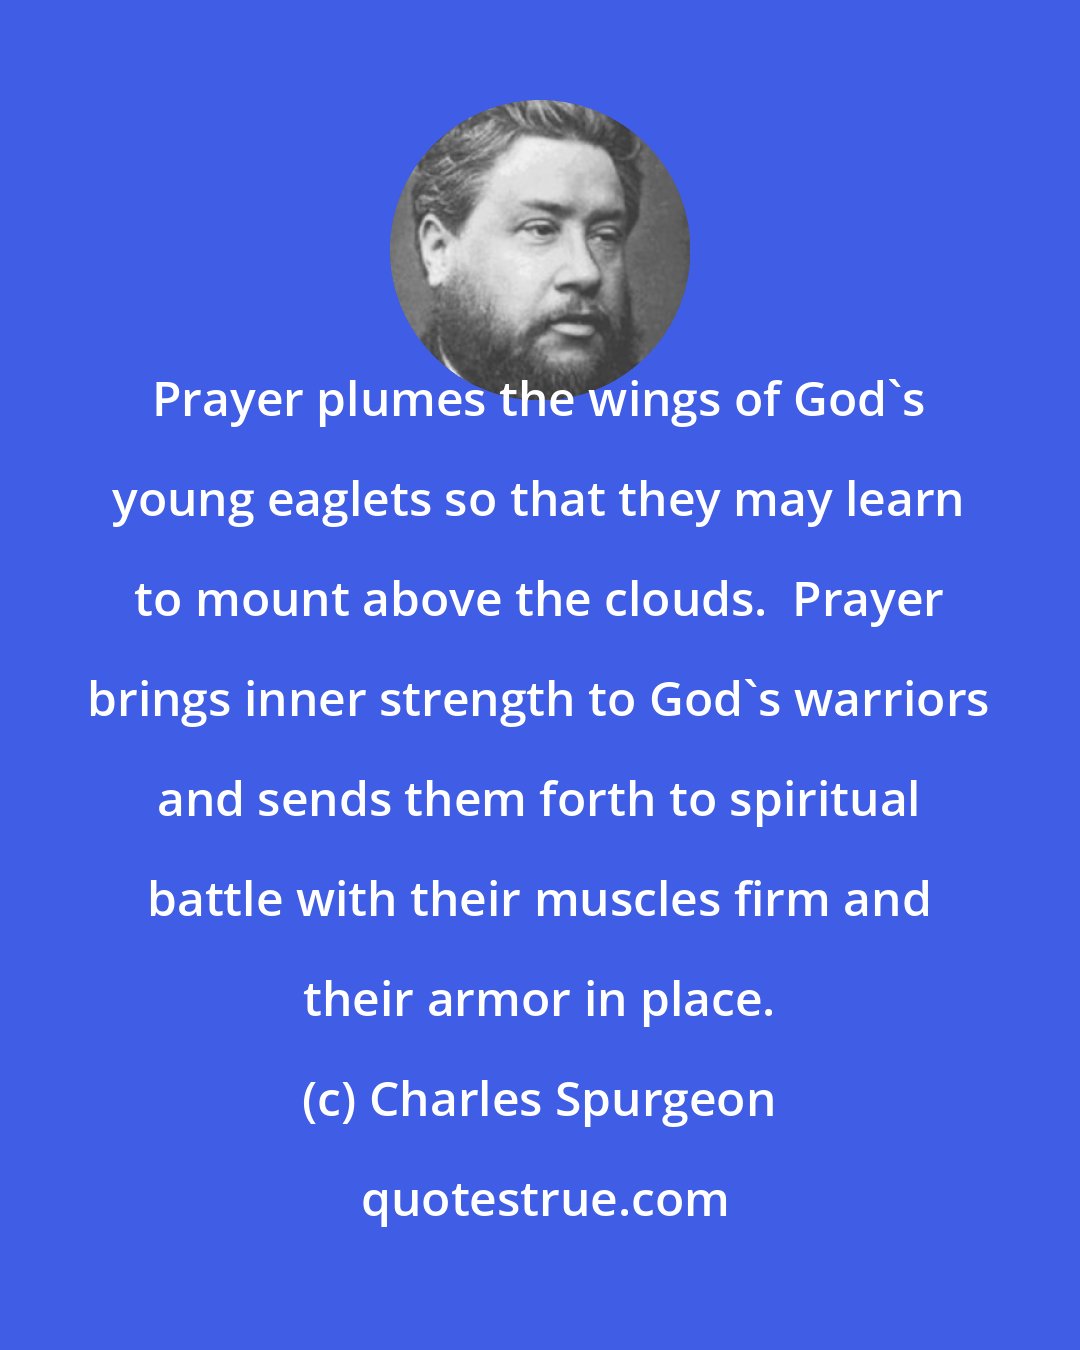 Charles Spurgeon: Prayer plumes the wings of God's young eaglets so that they may learn to mount above the clouds.  Prayer brings inner strength to God's warriors and sends them forth to spiritual battle with their muscles firm and their armor in place.